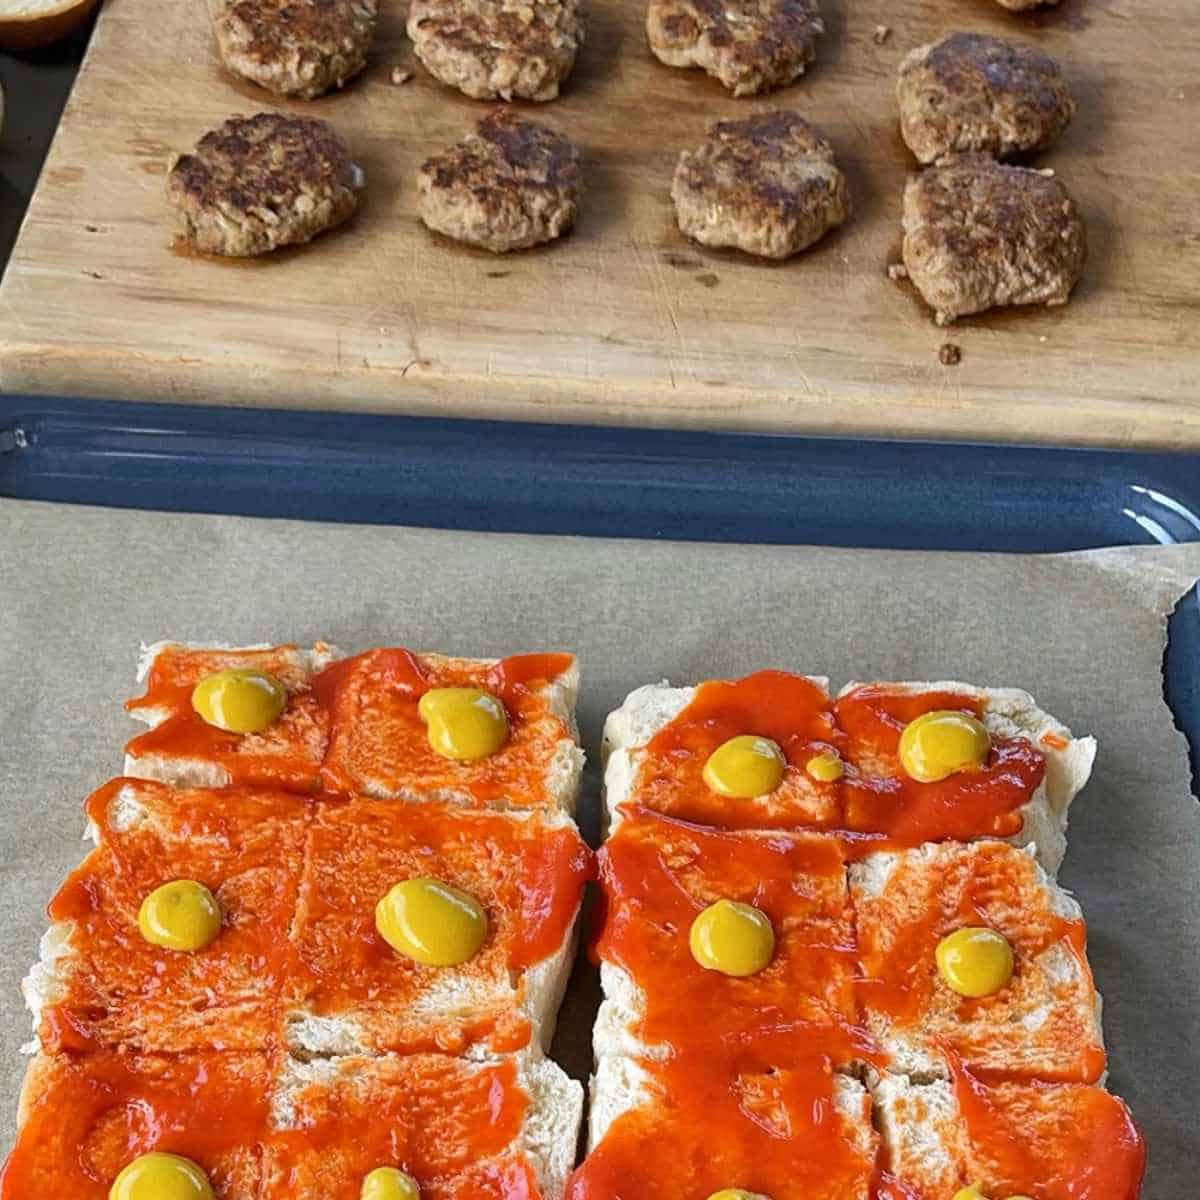 A shot of sliced buns with sauces added and burger patties resting on a wooden chopping board before the Cheeseburger Sliders are assembled and heated through in the oven.